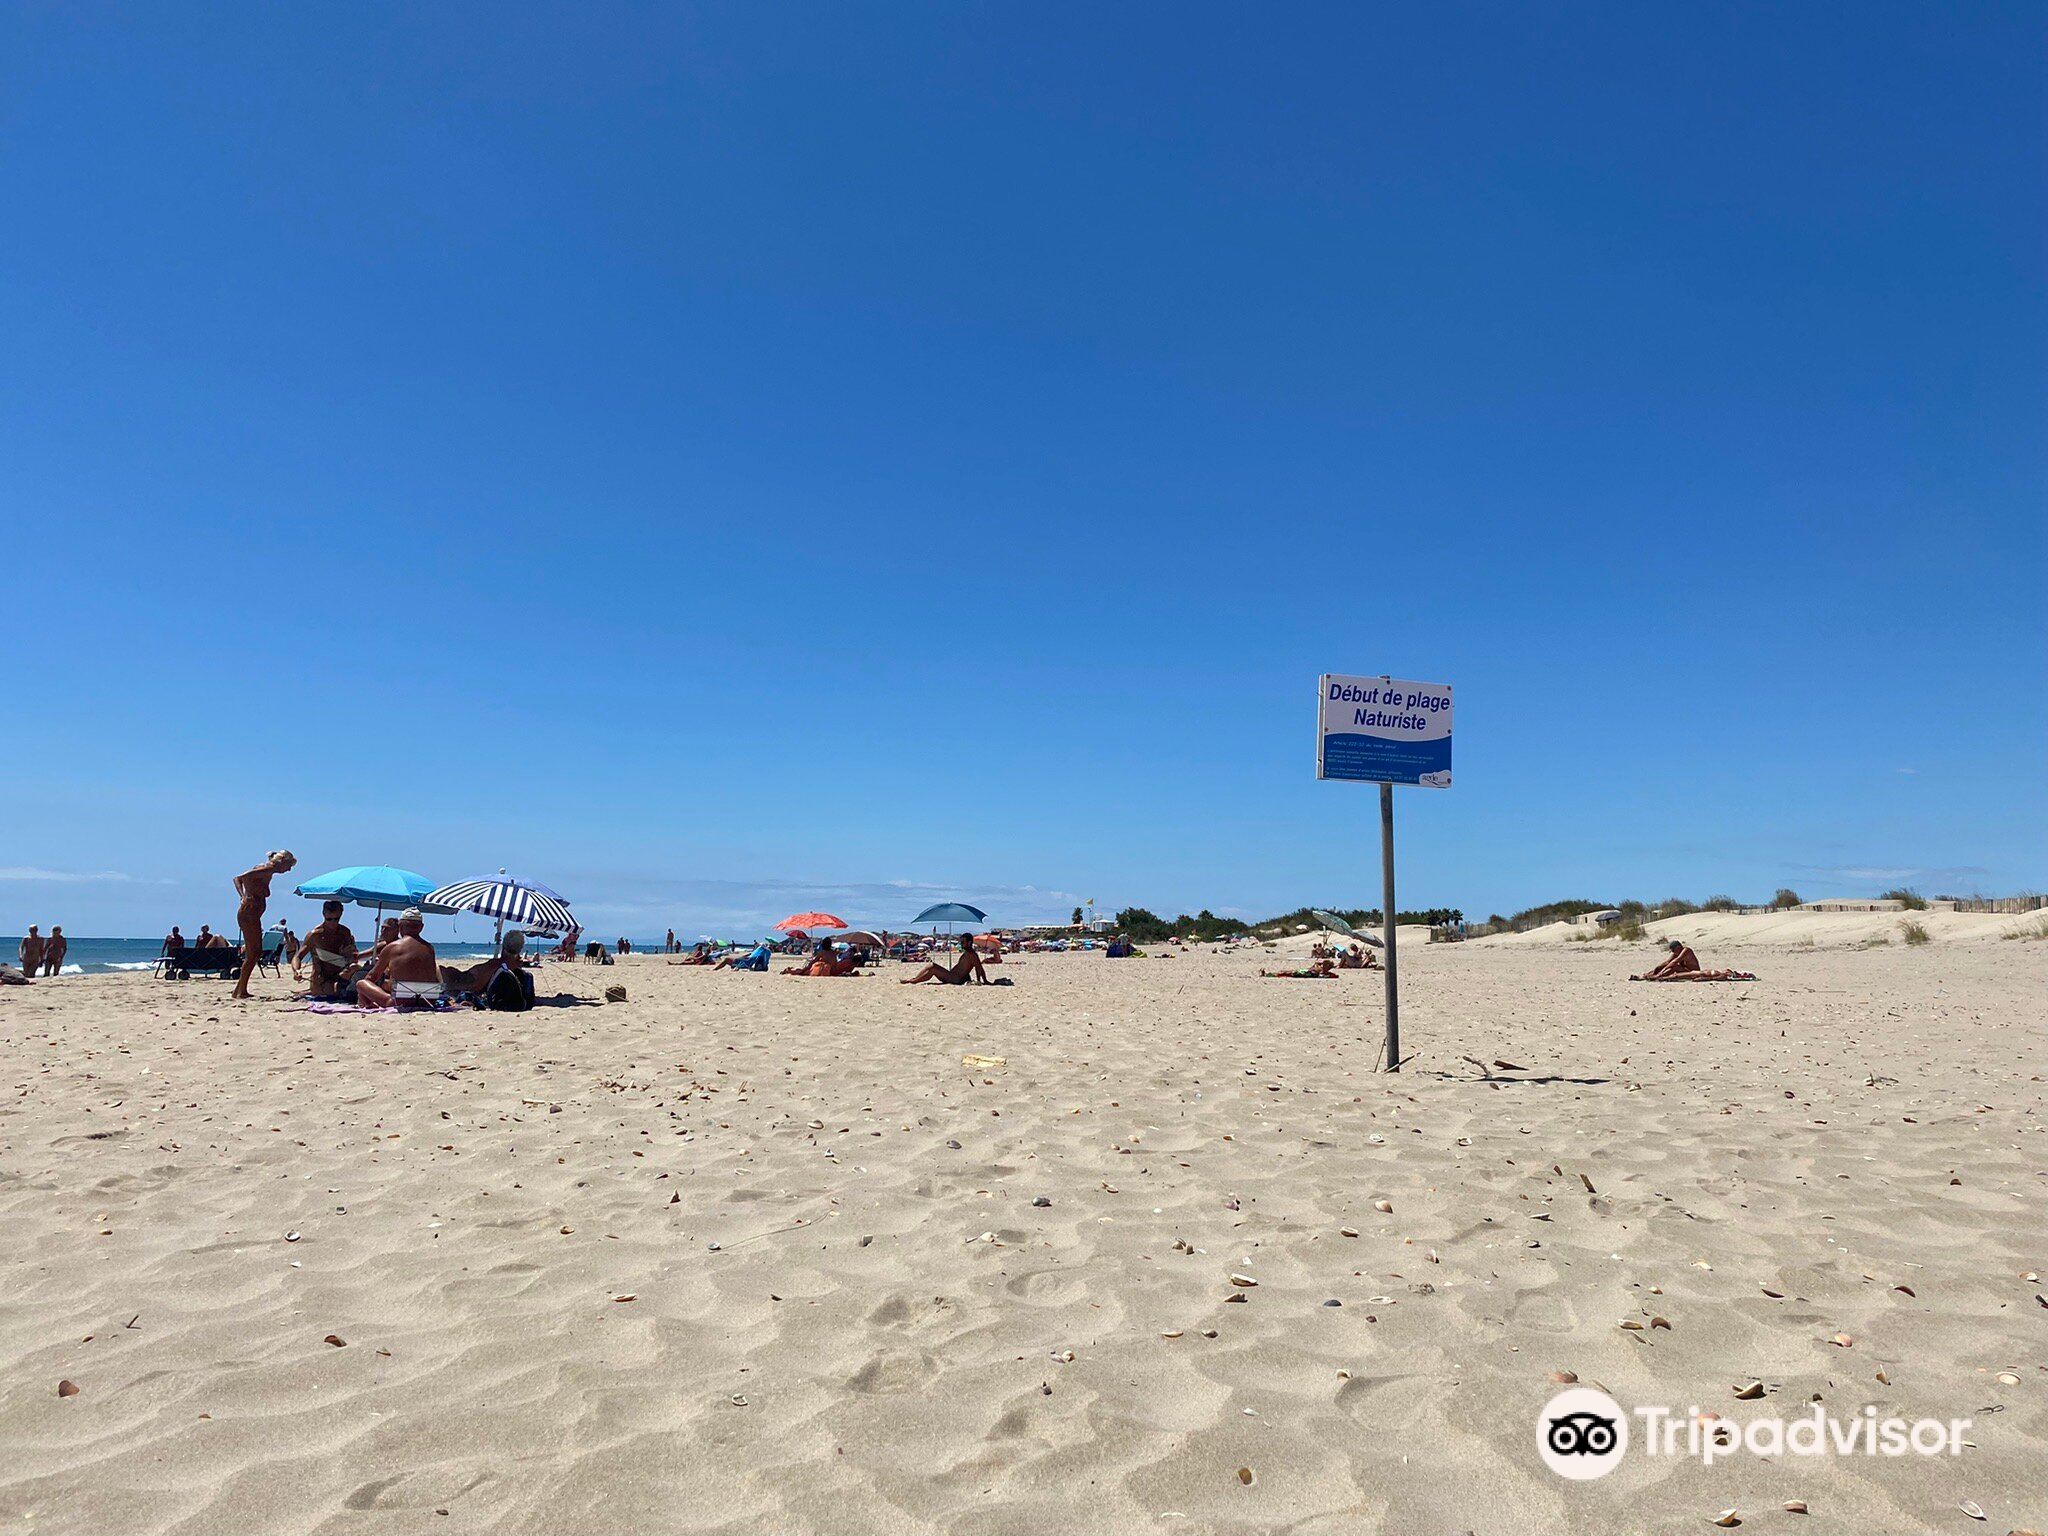 Latest travel itineraries for Plage Naturiste in September (updated in 2023), Plage Naturiste reviews, Plage Naturiste address and opening hours, popular attractions, hotels, and restaurants near Plage Naturiste pic pic